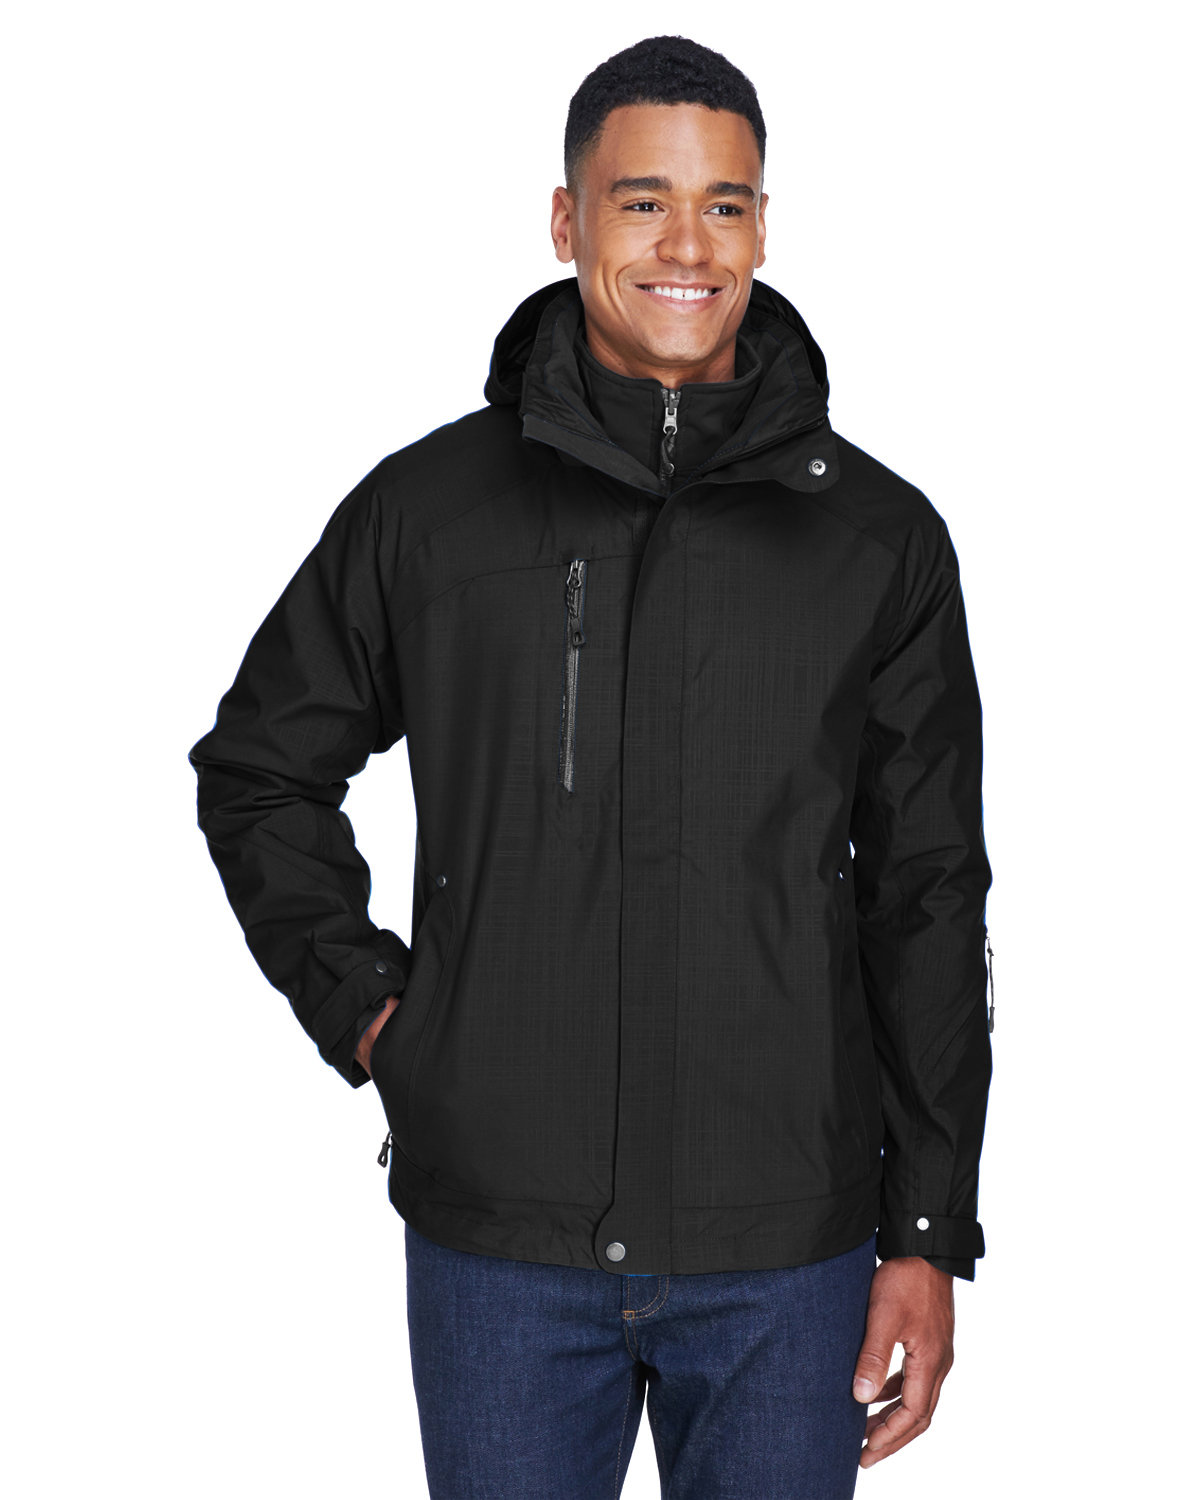 North End 88178 - Men's Caprice 3-In-1 Jacket With Soft Shell Liner